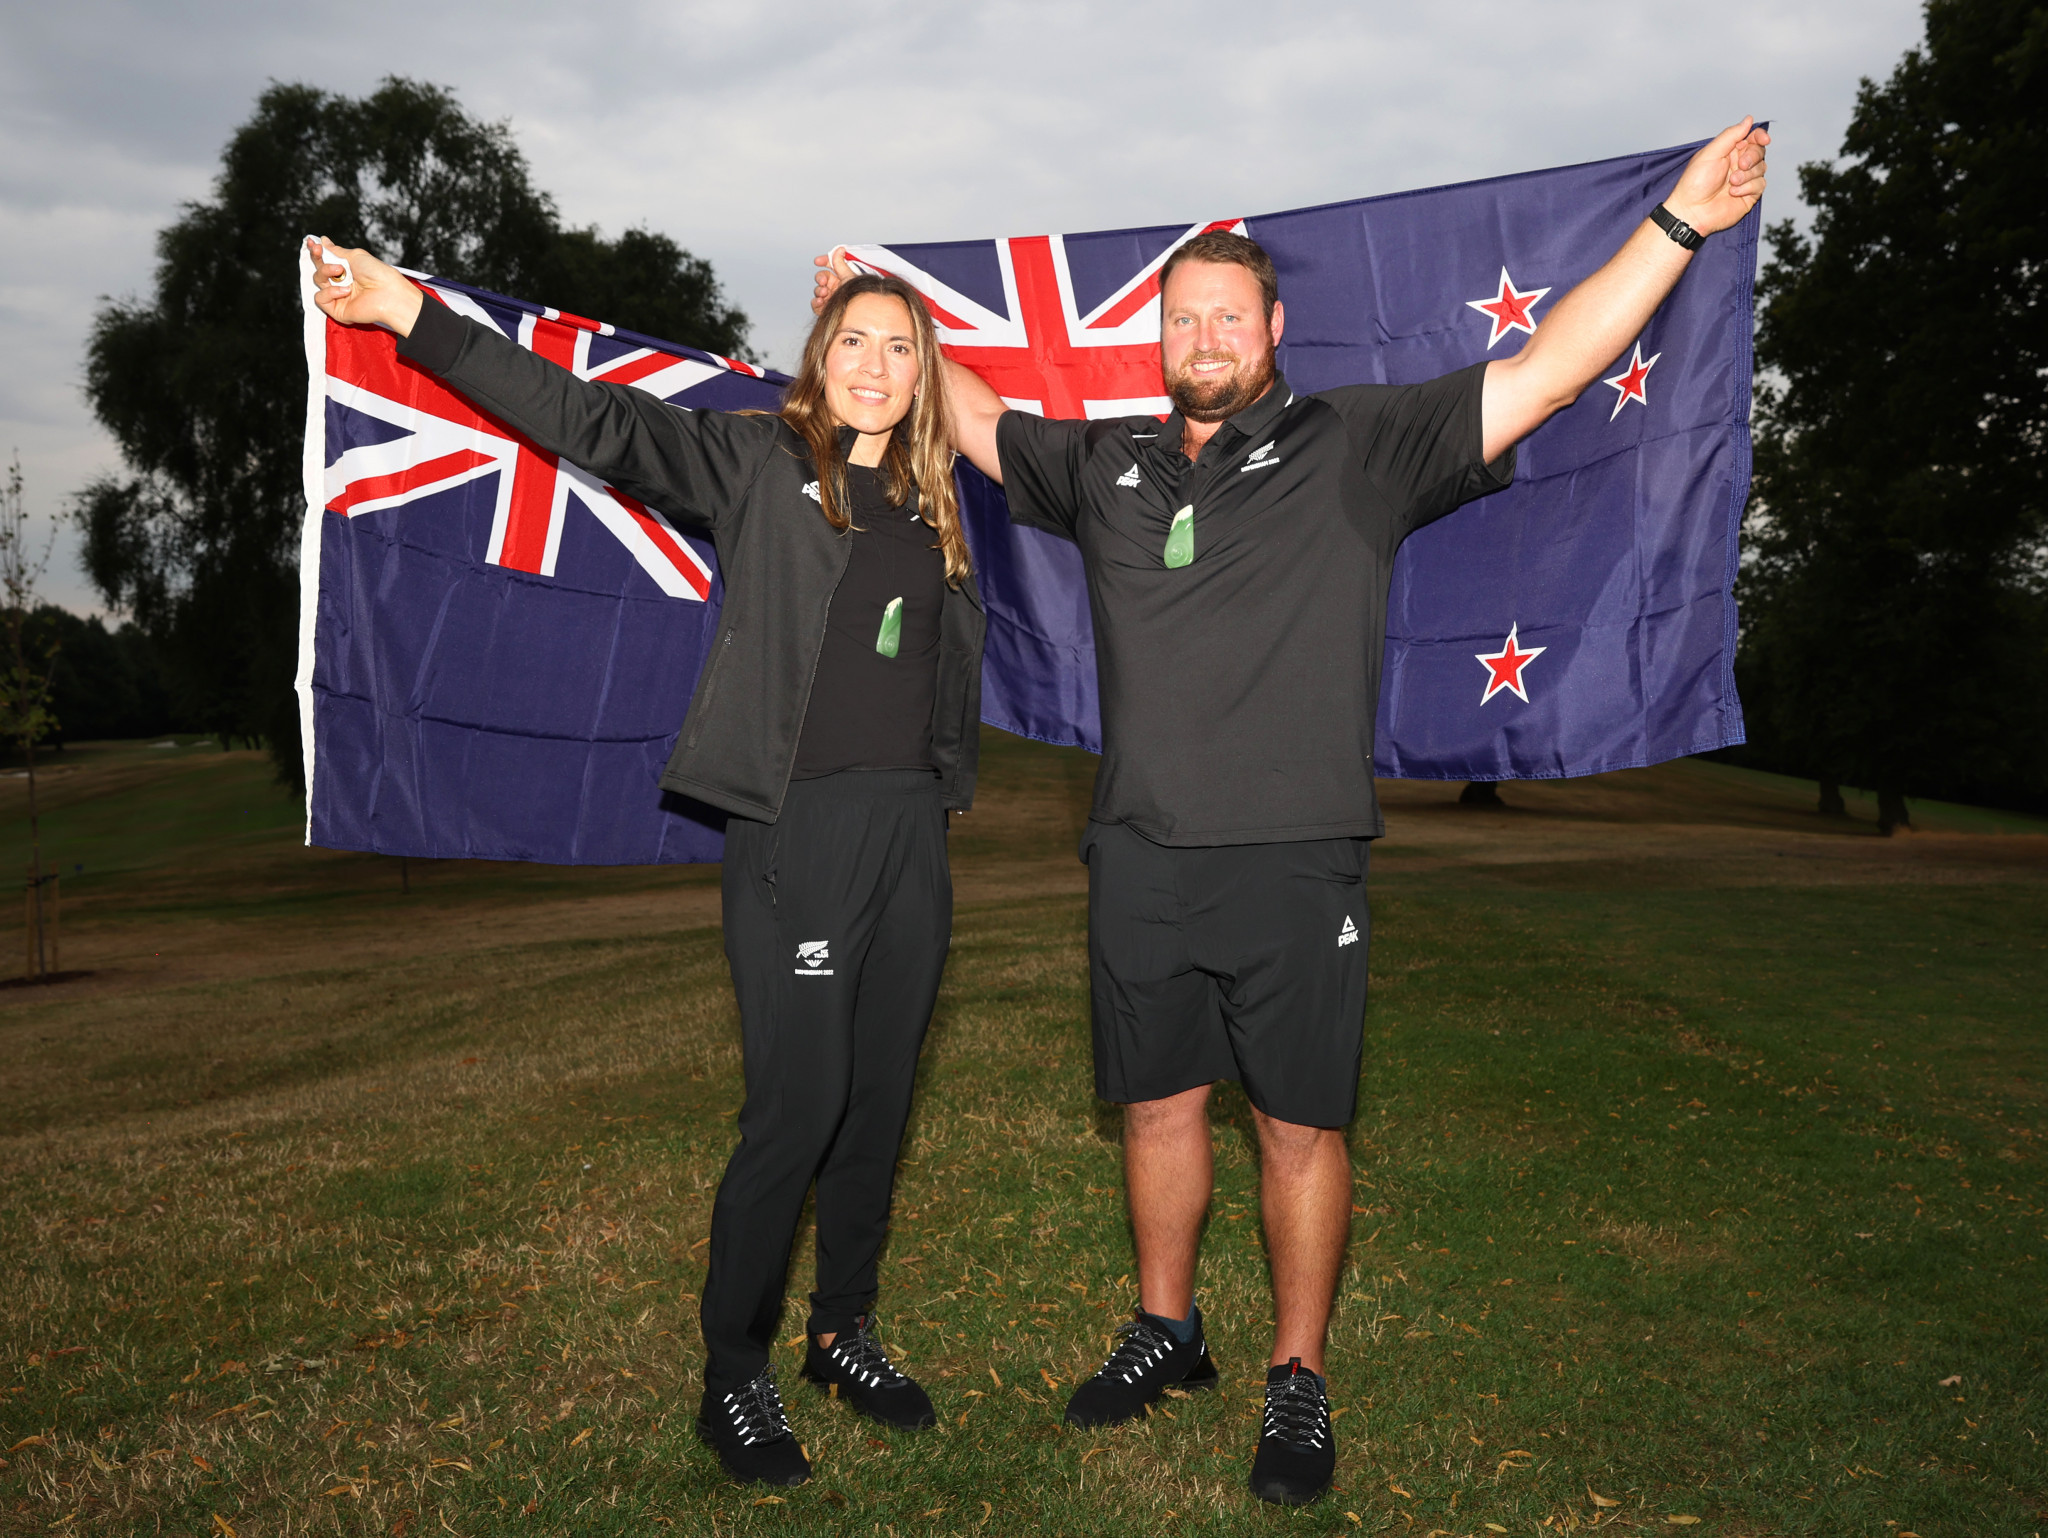 Squash player Joelle King, left, and shot putter Tom Walsh, right, were named New Zealand's flagbearers at Edgbaston Golf Club ©Getty Images